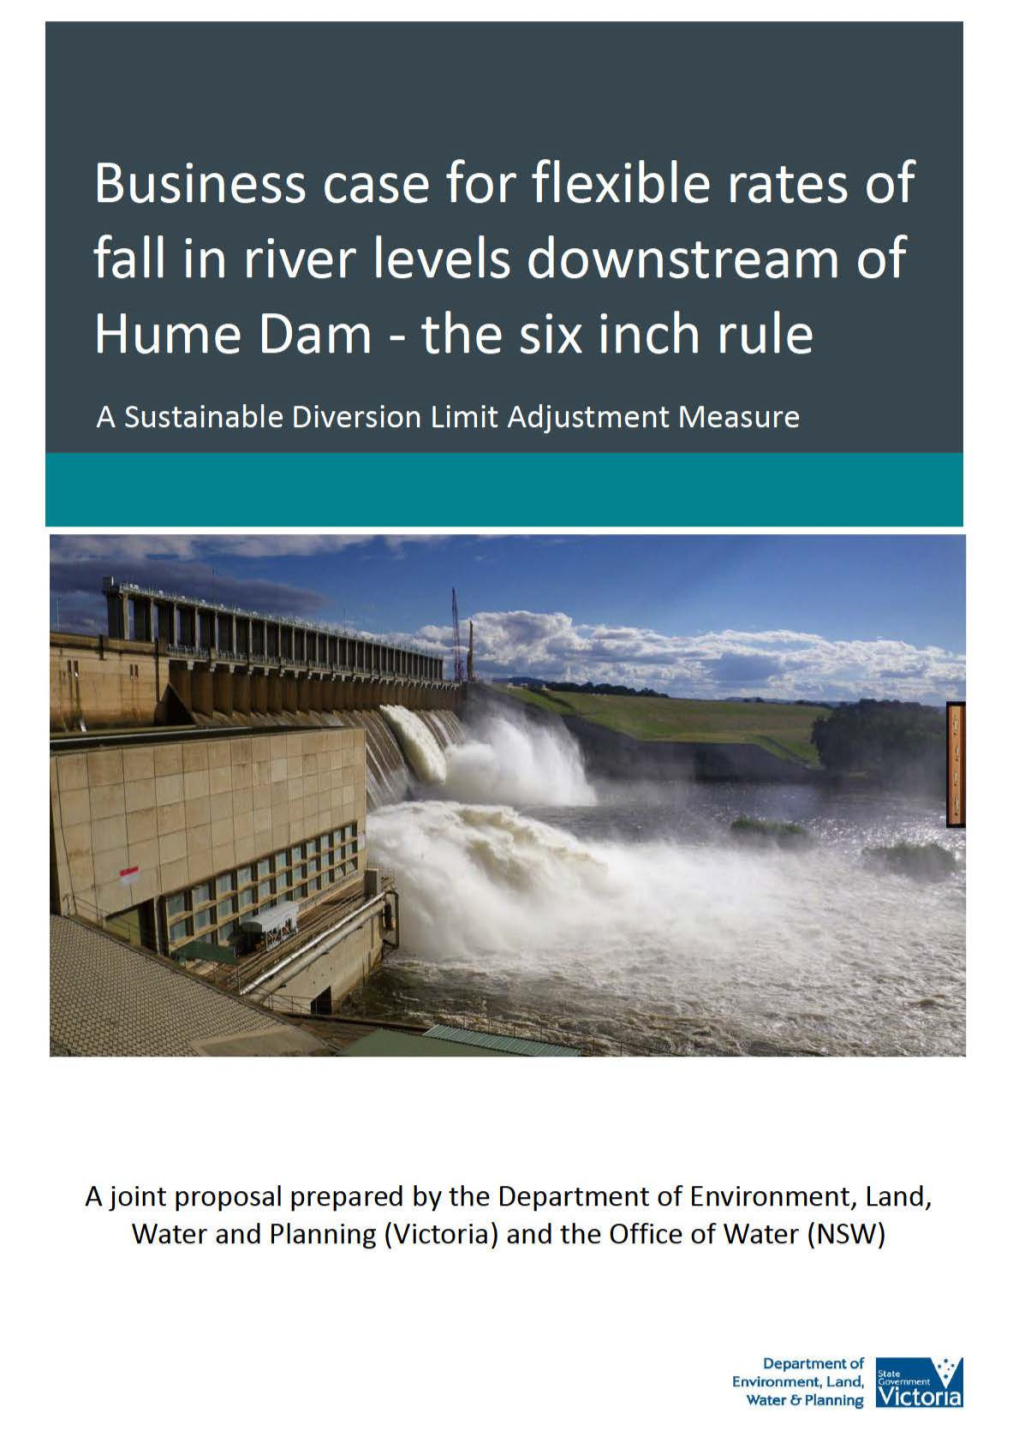 5-Flexible-Rates-Of-Fall-In-River-Levels